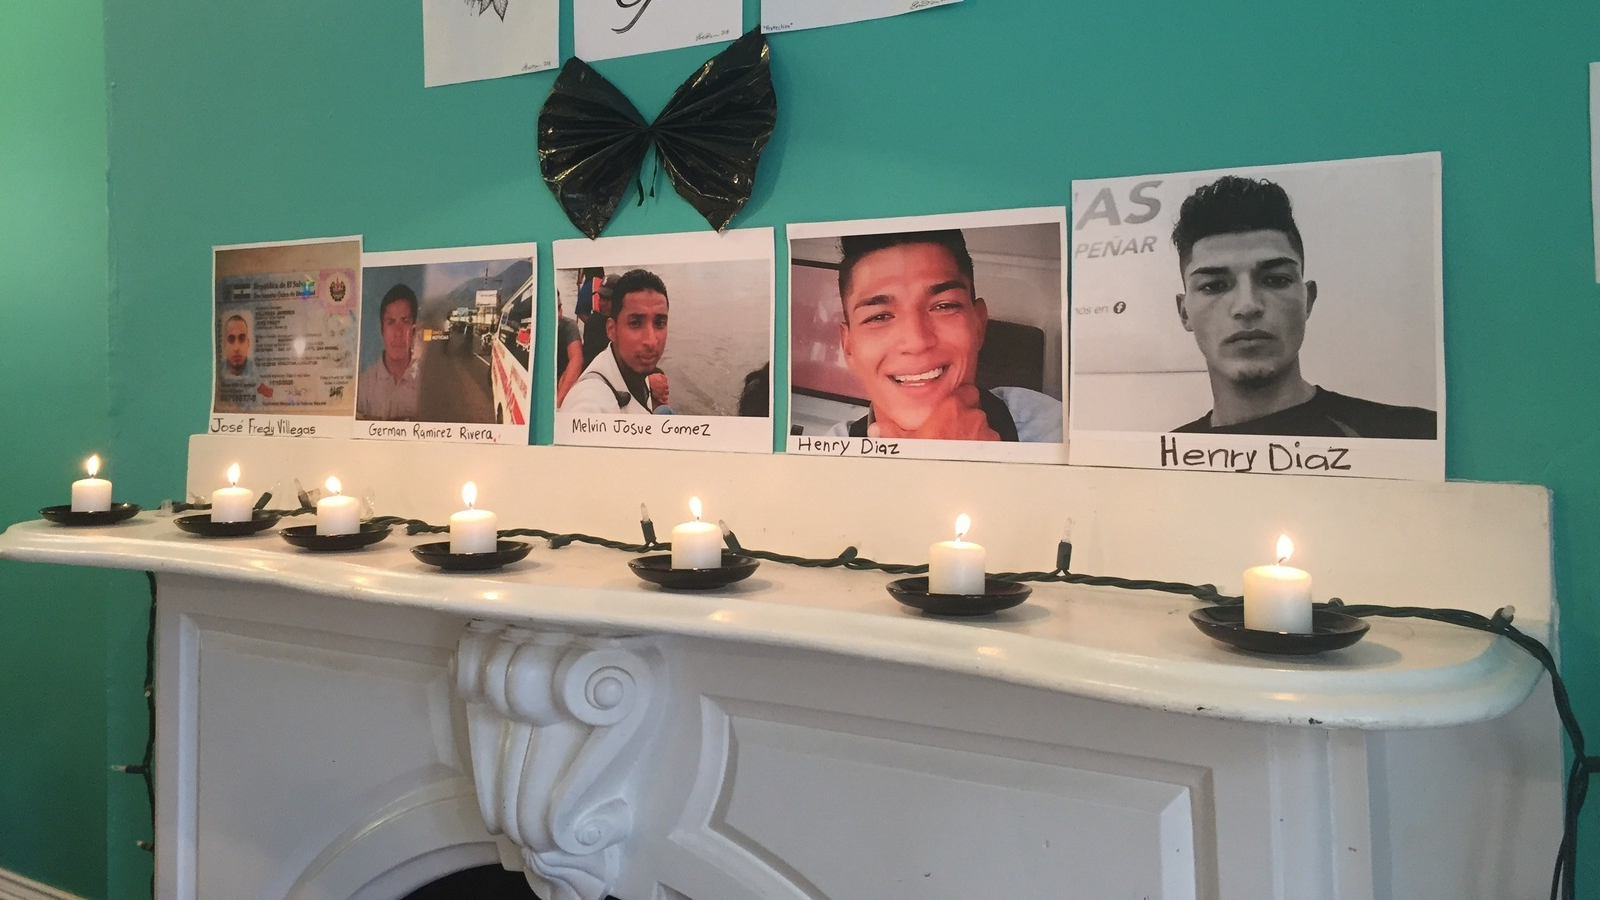 Halifax event commemorated some of the caravan migrants who died on their journey. From left to right: José Fredy Villegas, German Ramirez Rivera, Merlin Josue Gomez, Henry Diaz.